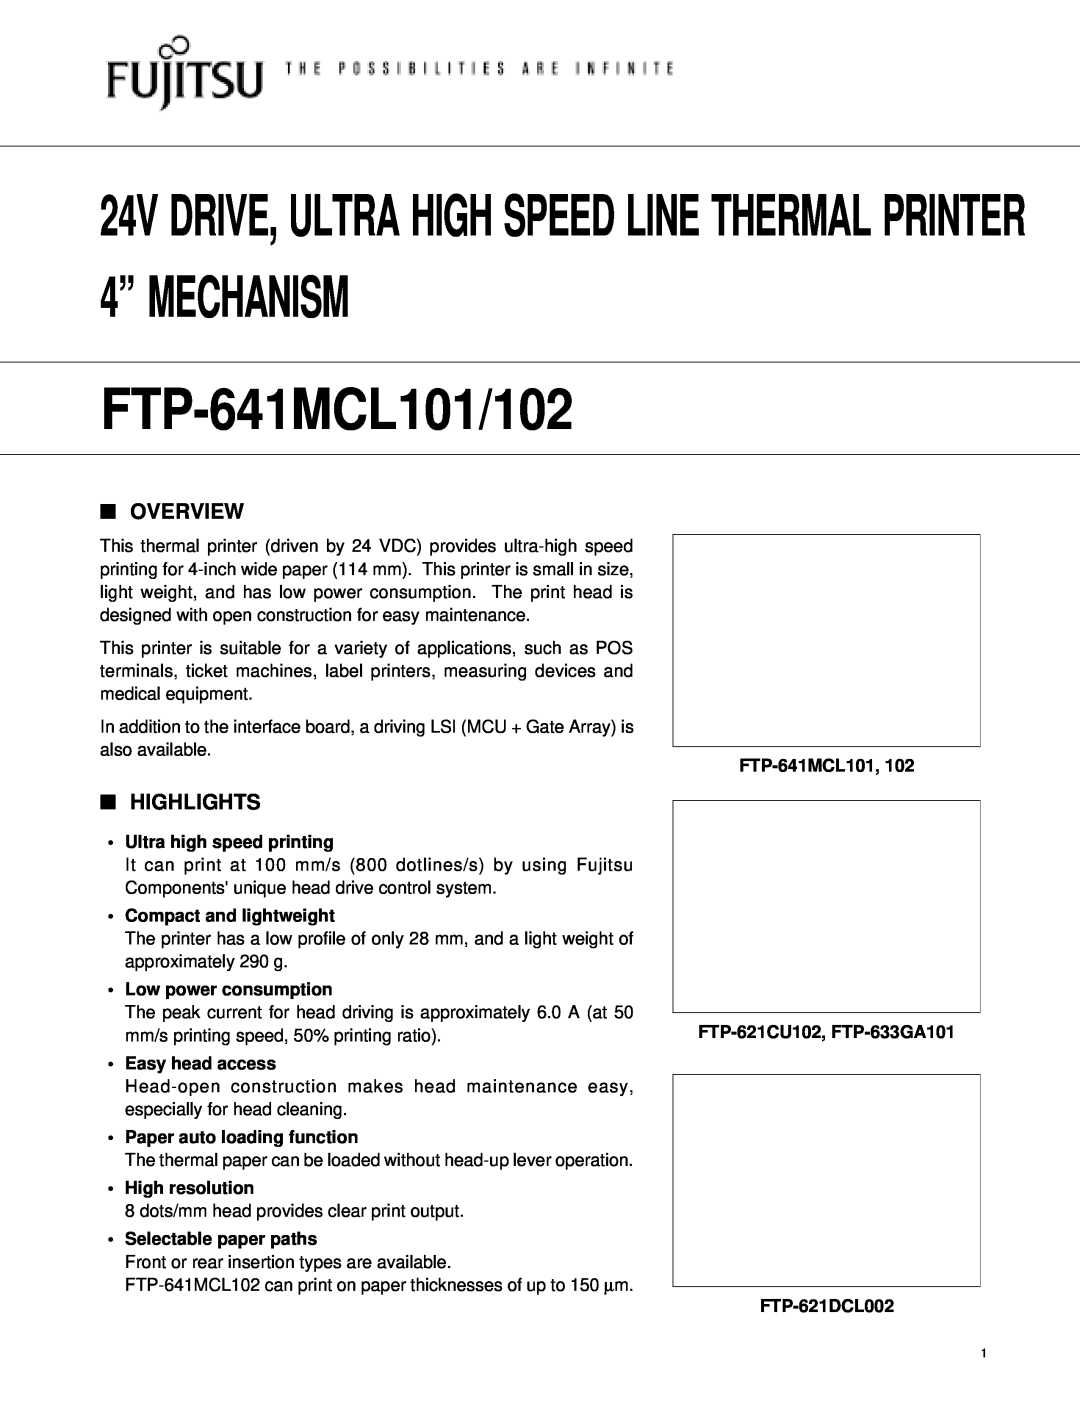 Fujitsu FTP-641MCL101/102 manual Overview, Highlights, Ultra high speed printing, Compact and lightweight, High resolution 